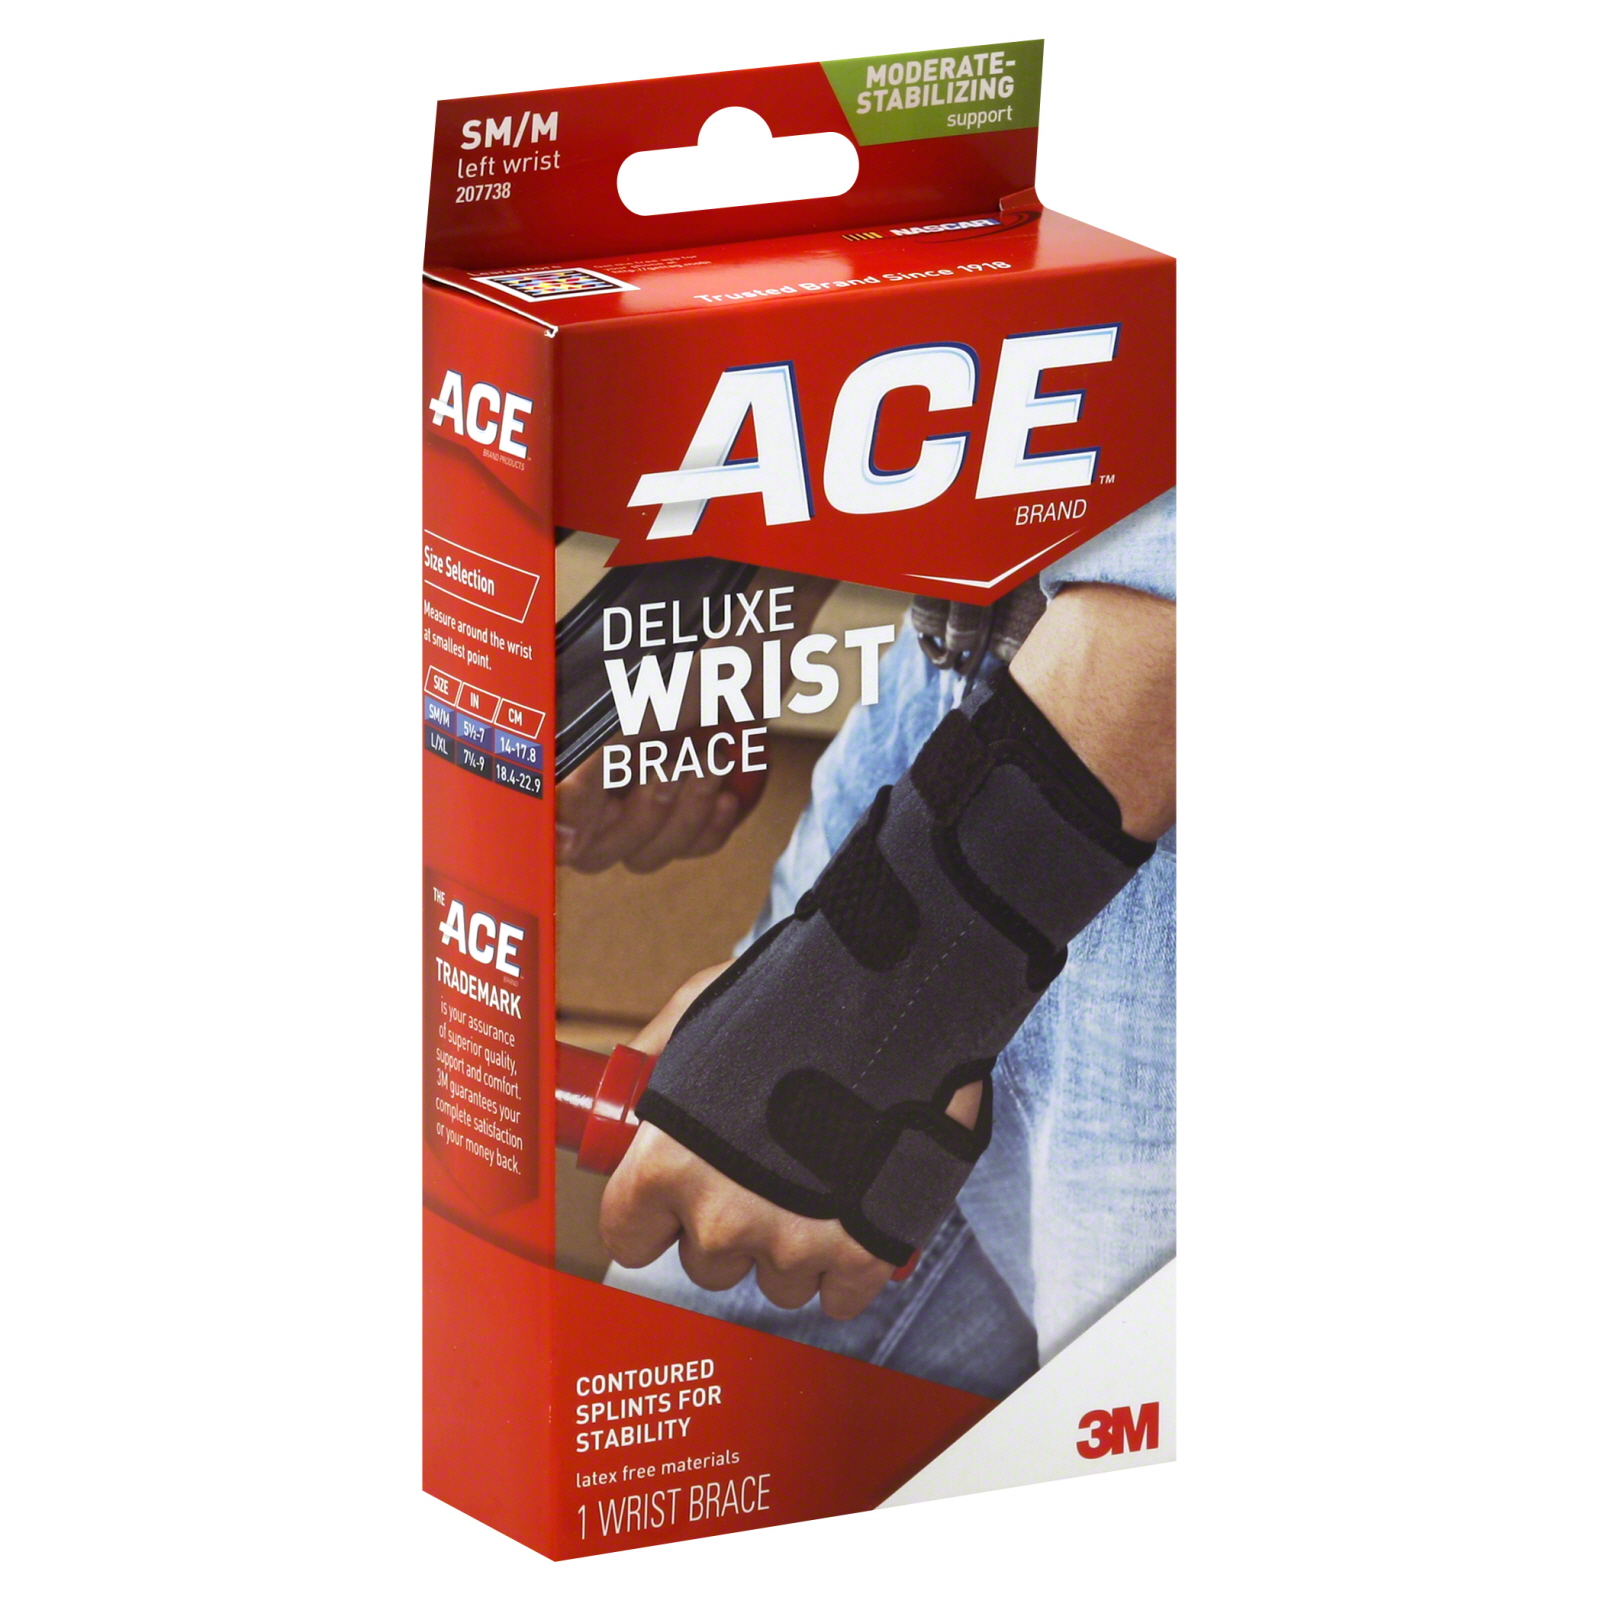 Ace Wrist Br, Deluxe, SM/M, Left Wrist, Moderate-Stabilizing Support, 1 br